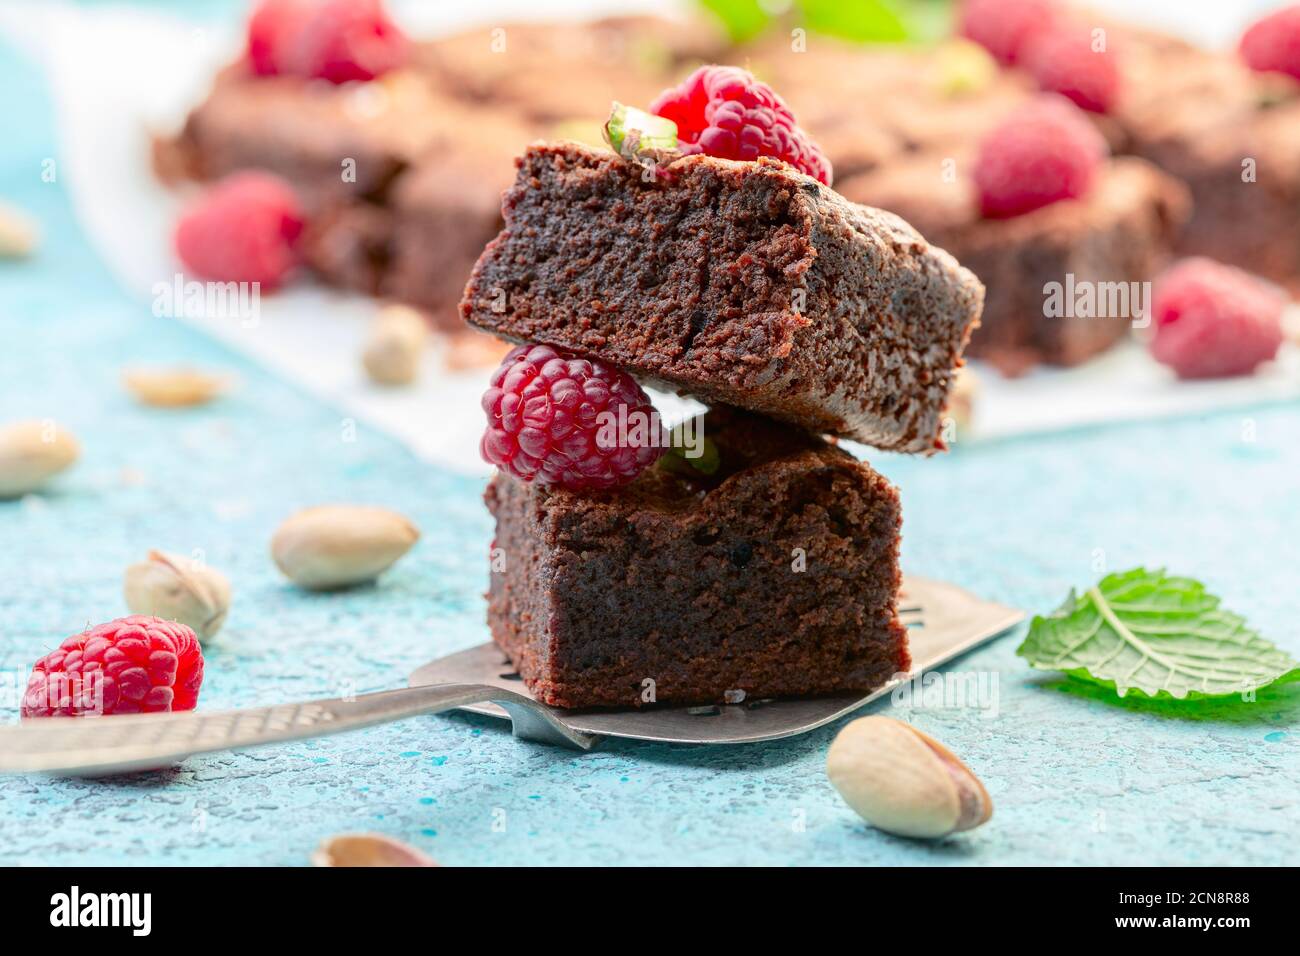 Brownie slices with raspberries and pistachios. Stock Photo